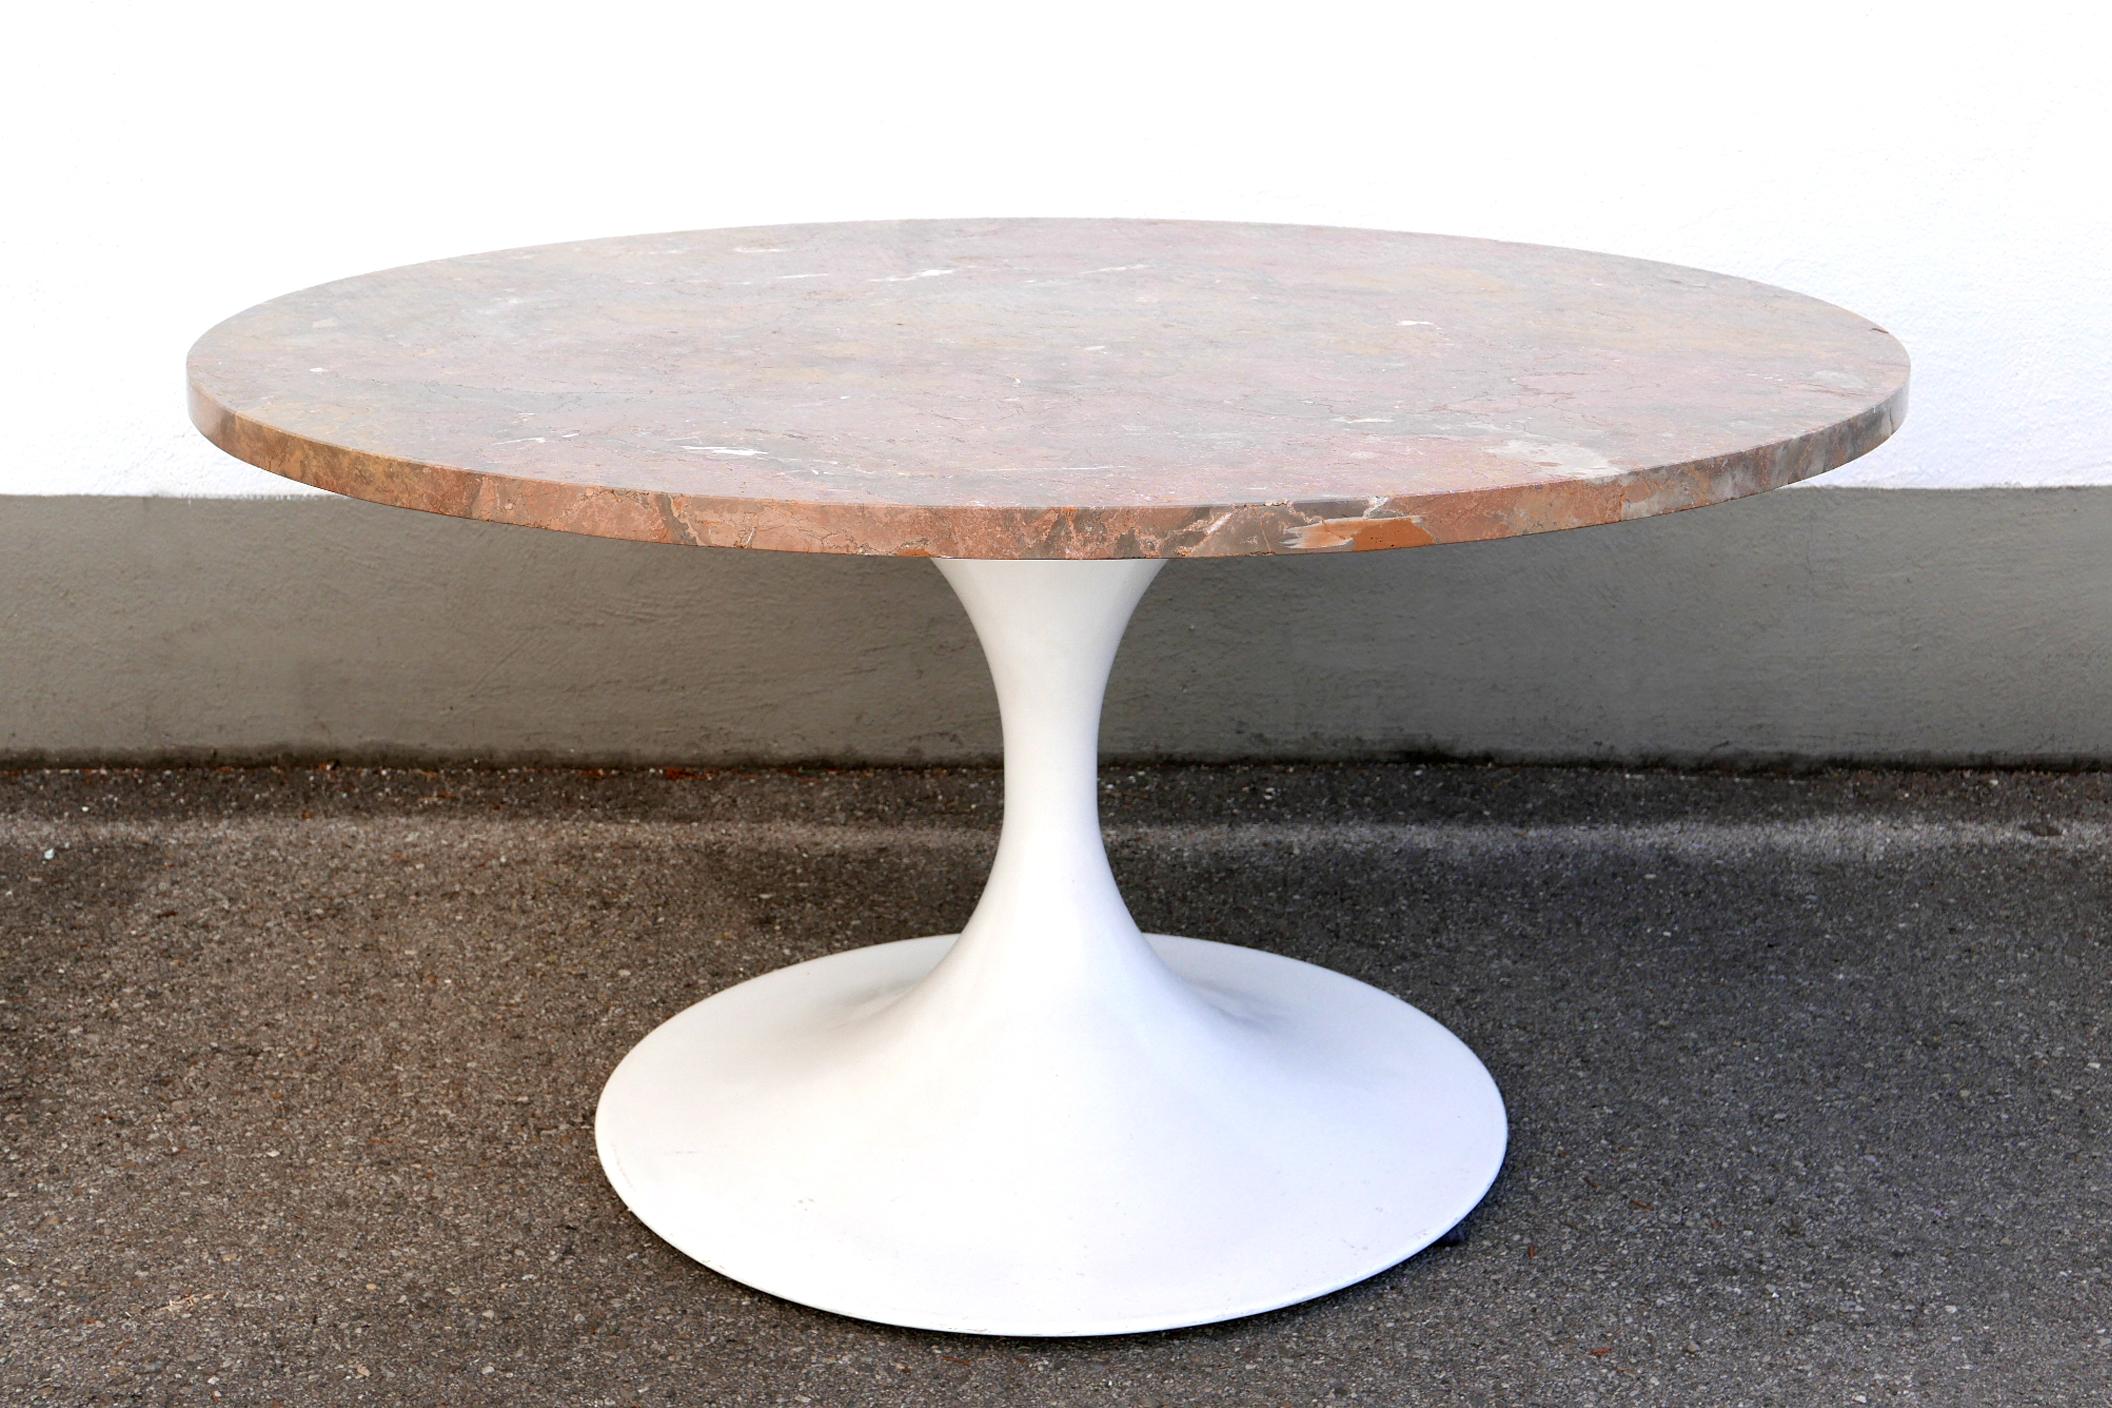 Rare Mid-Century Modern Tulip Base Marble Coffee Table by Honsel, Germany, 1960s For Sale 4